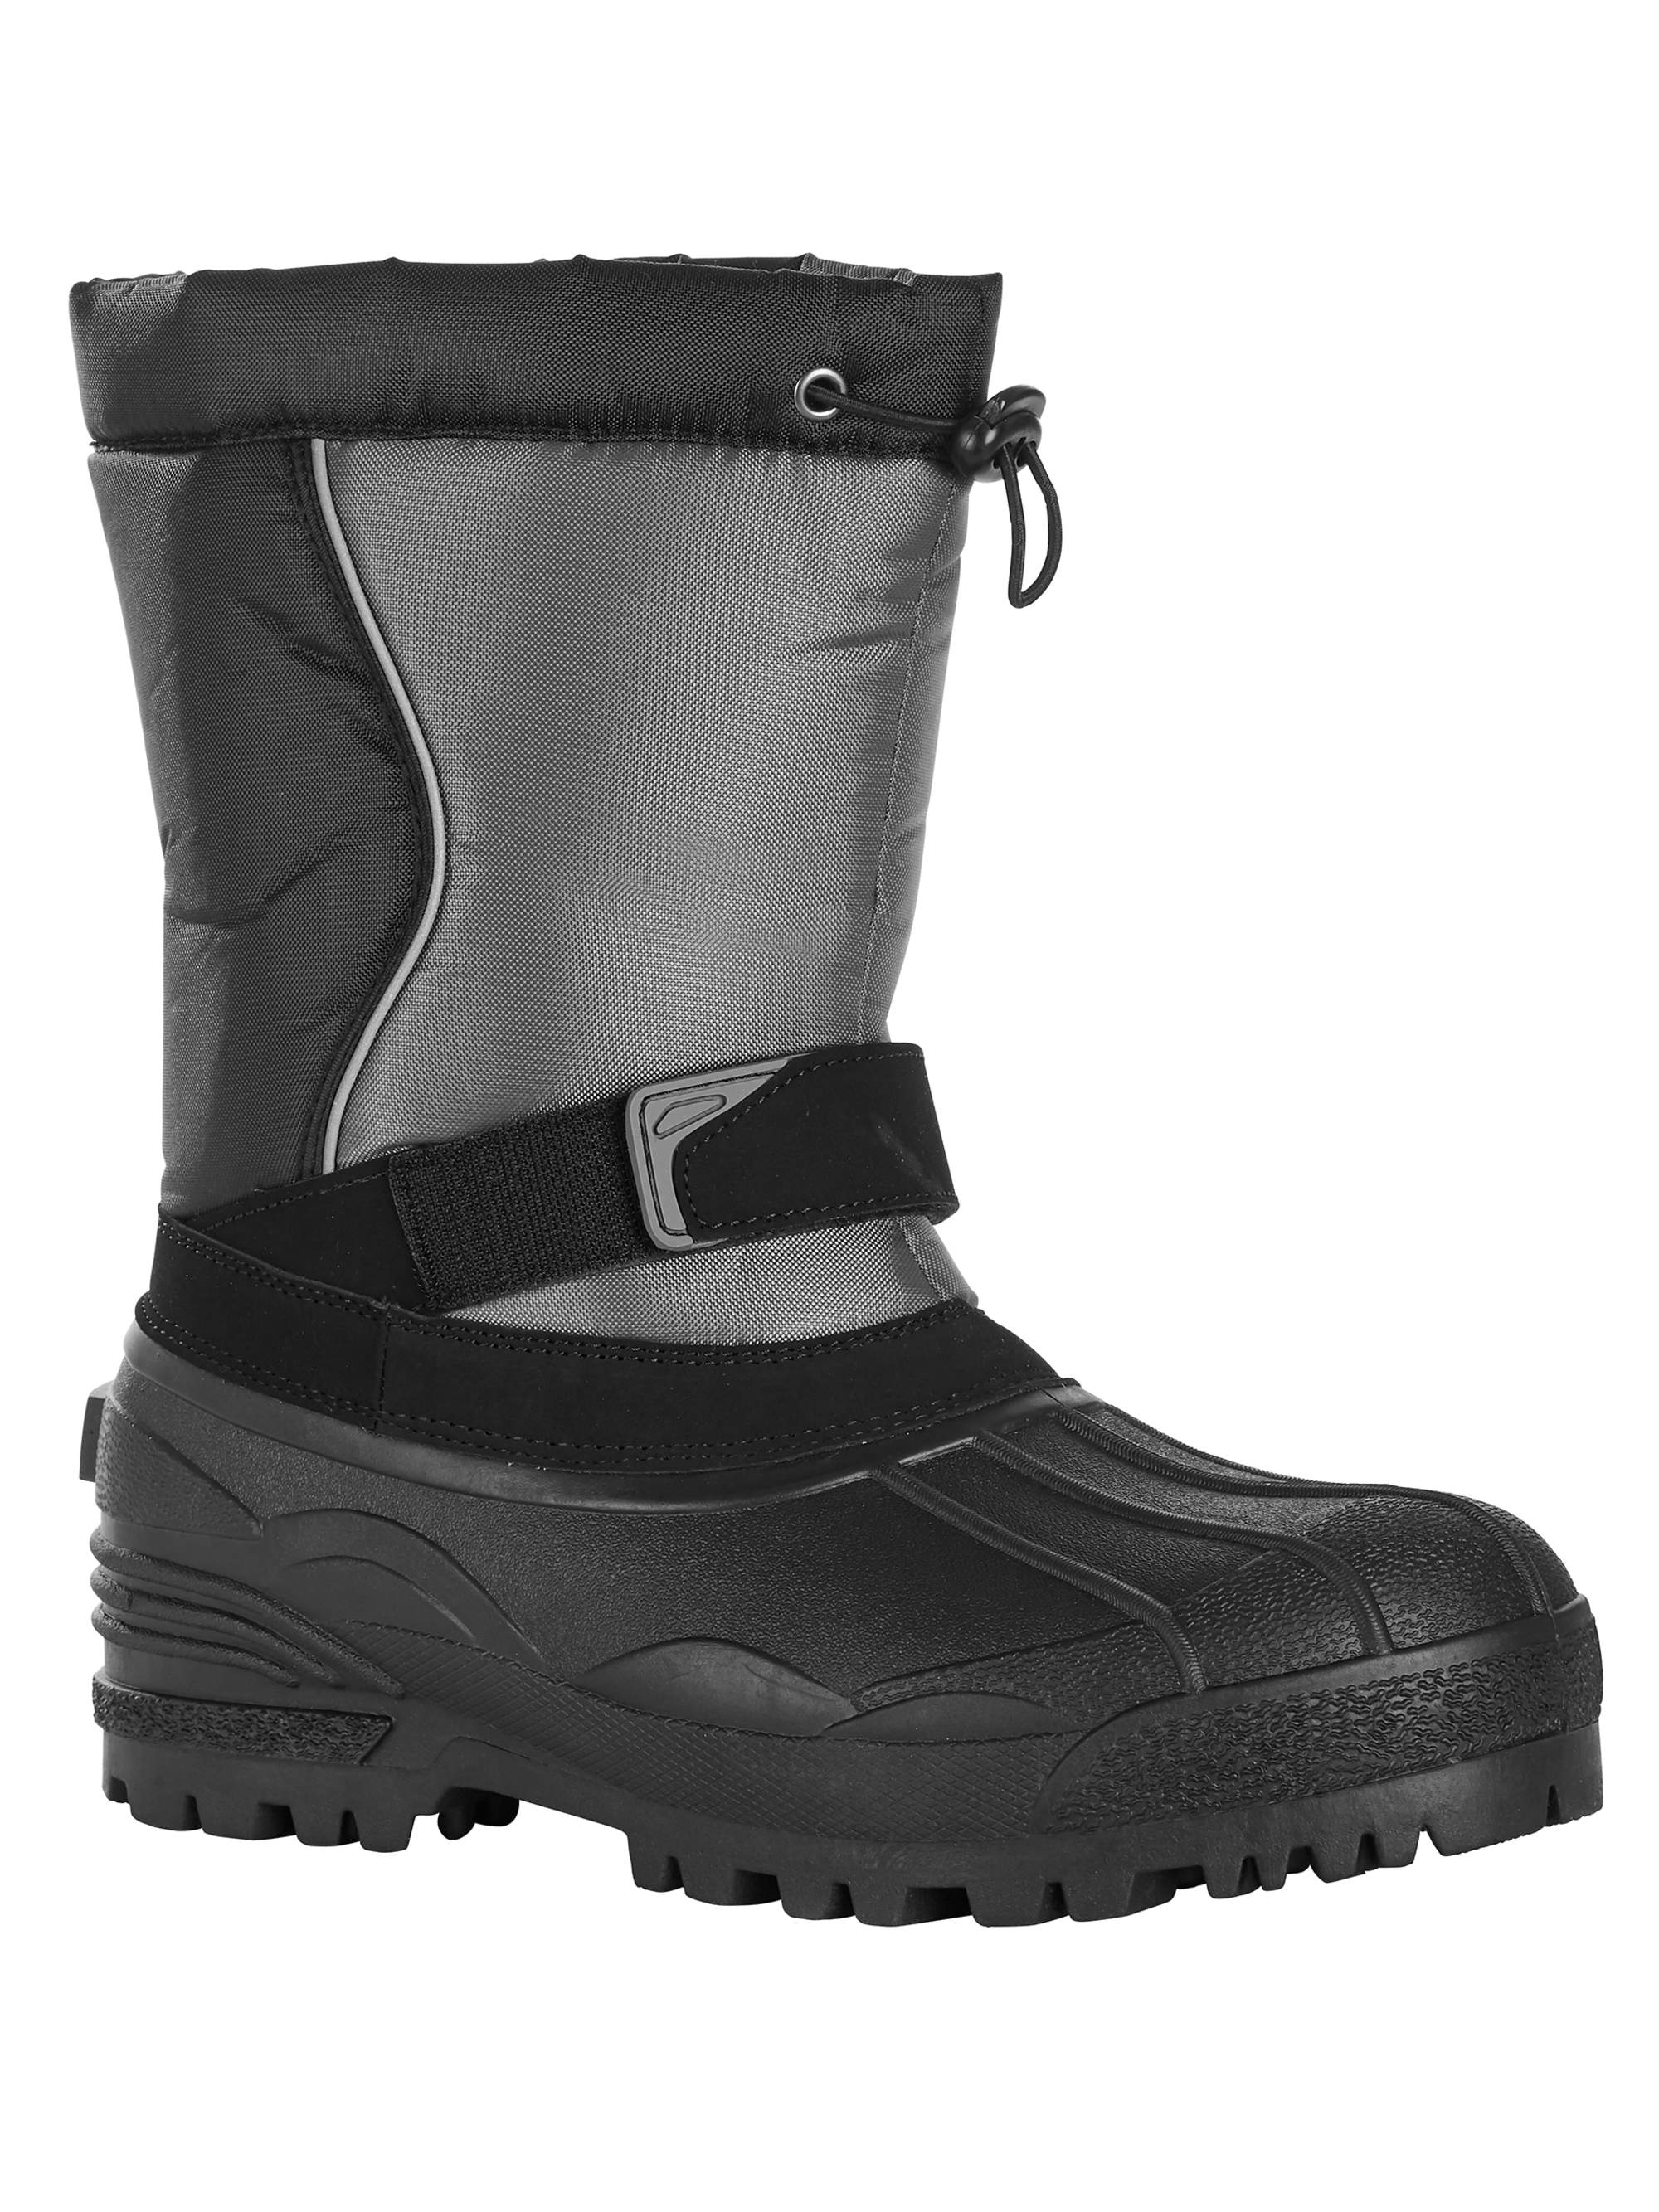 George Men's Essential Winter Boots - image 1 of 6